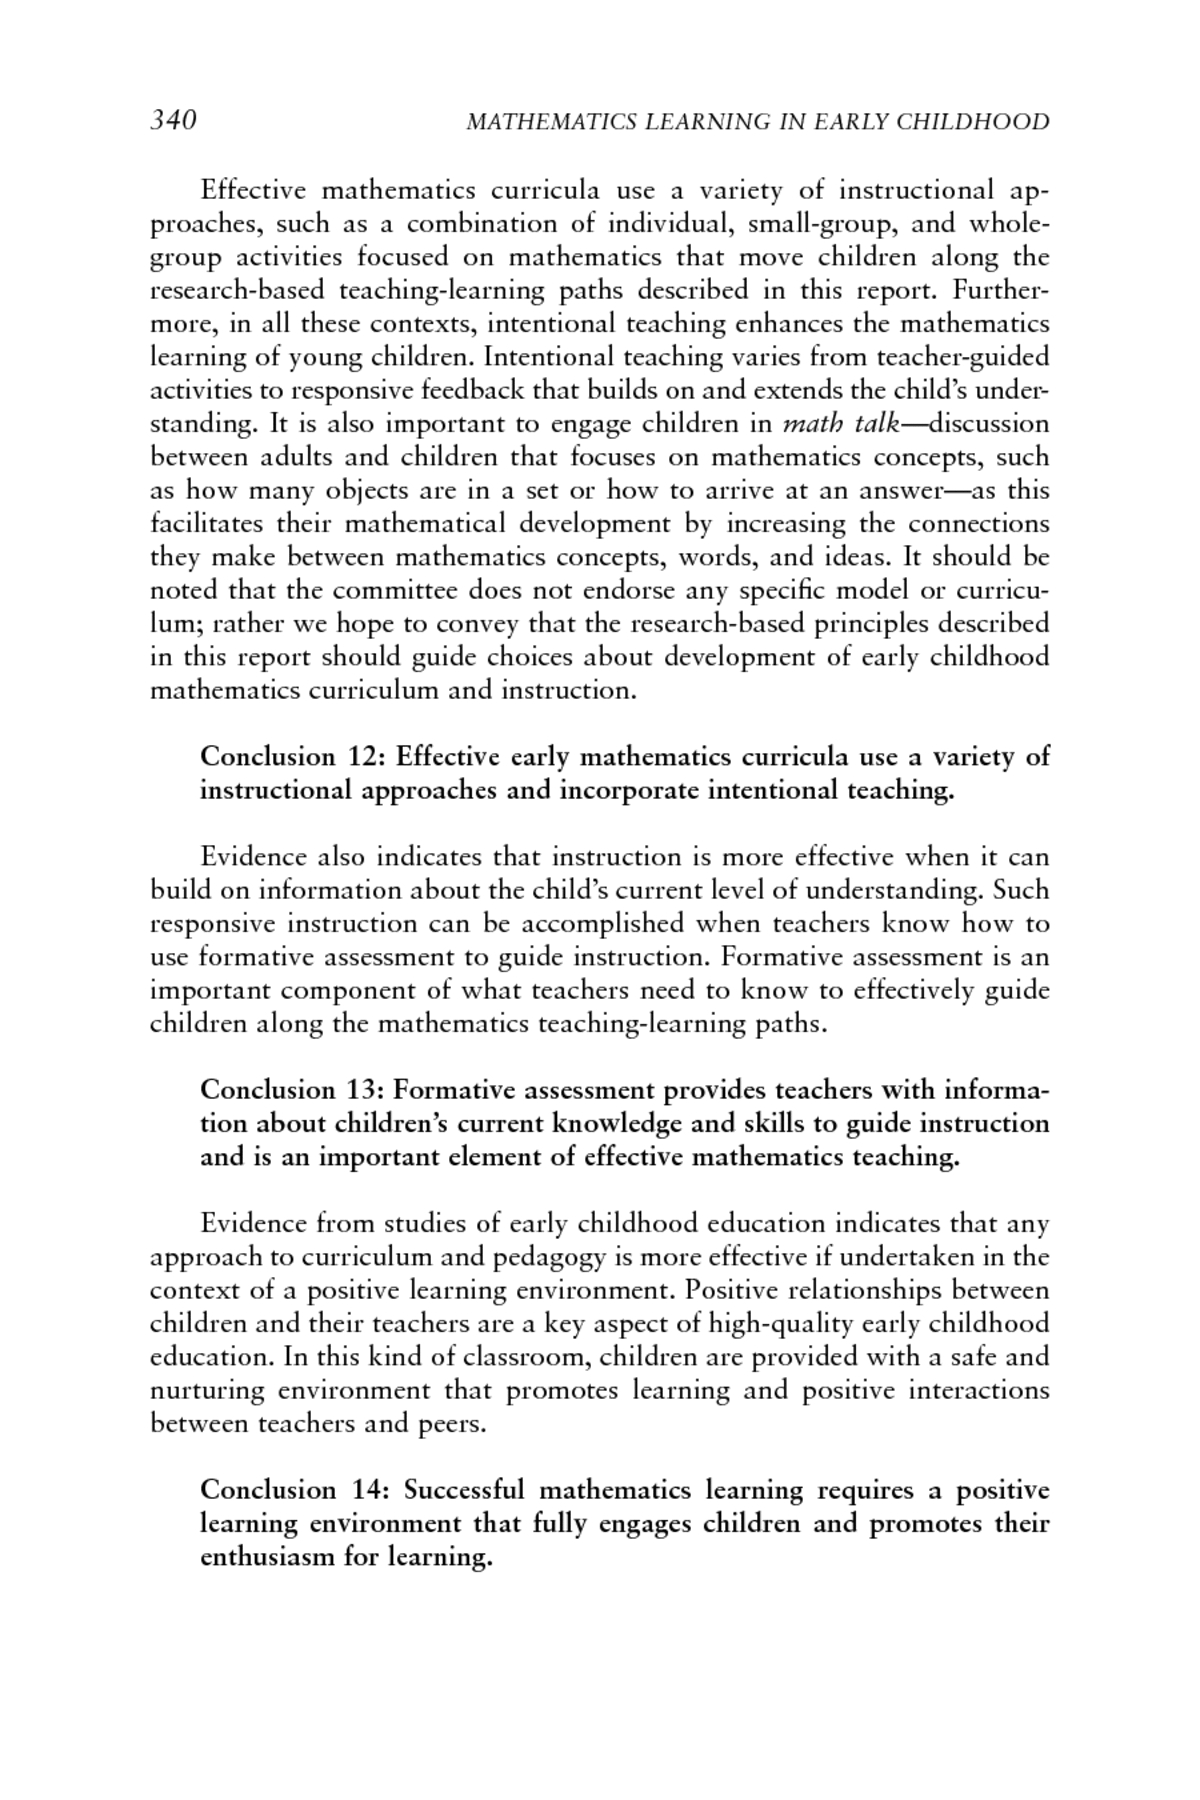 essay on how effective are current methods of school teaching